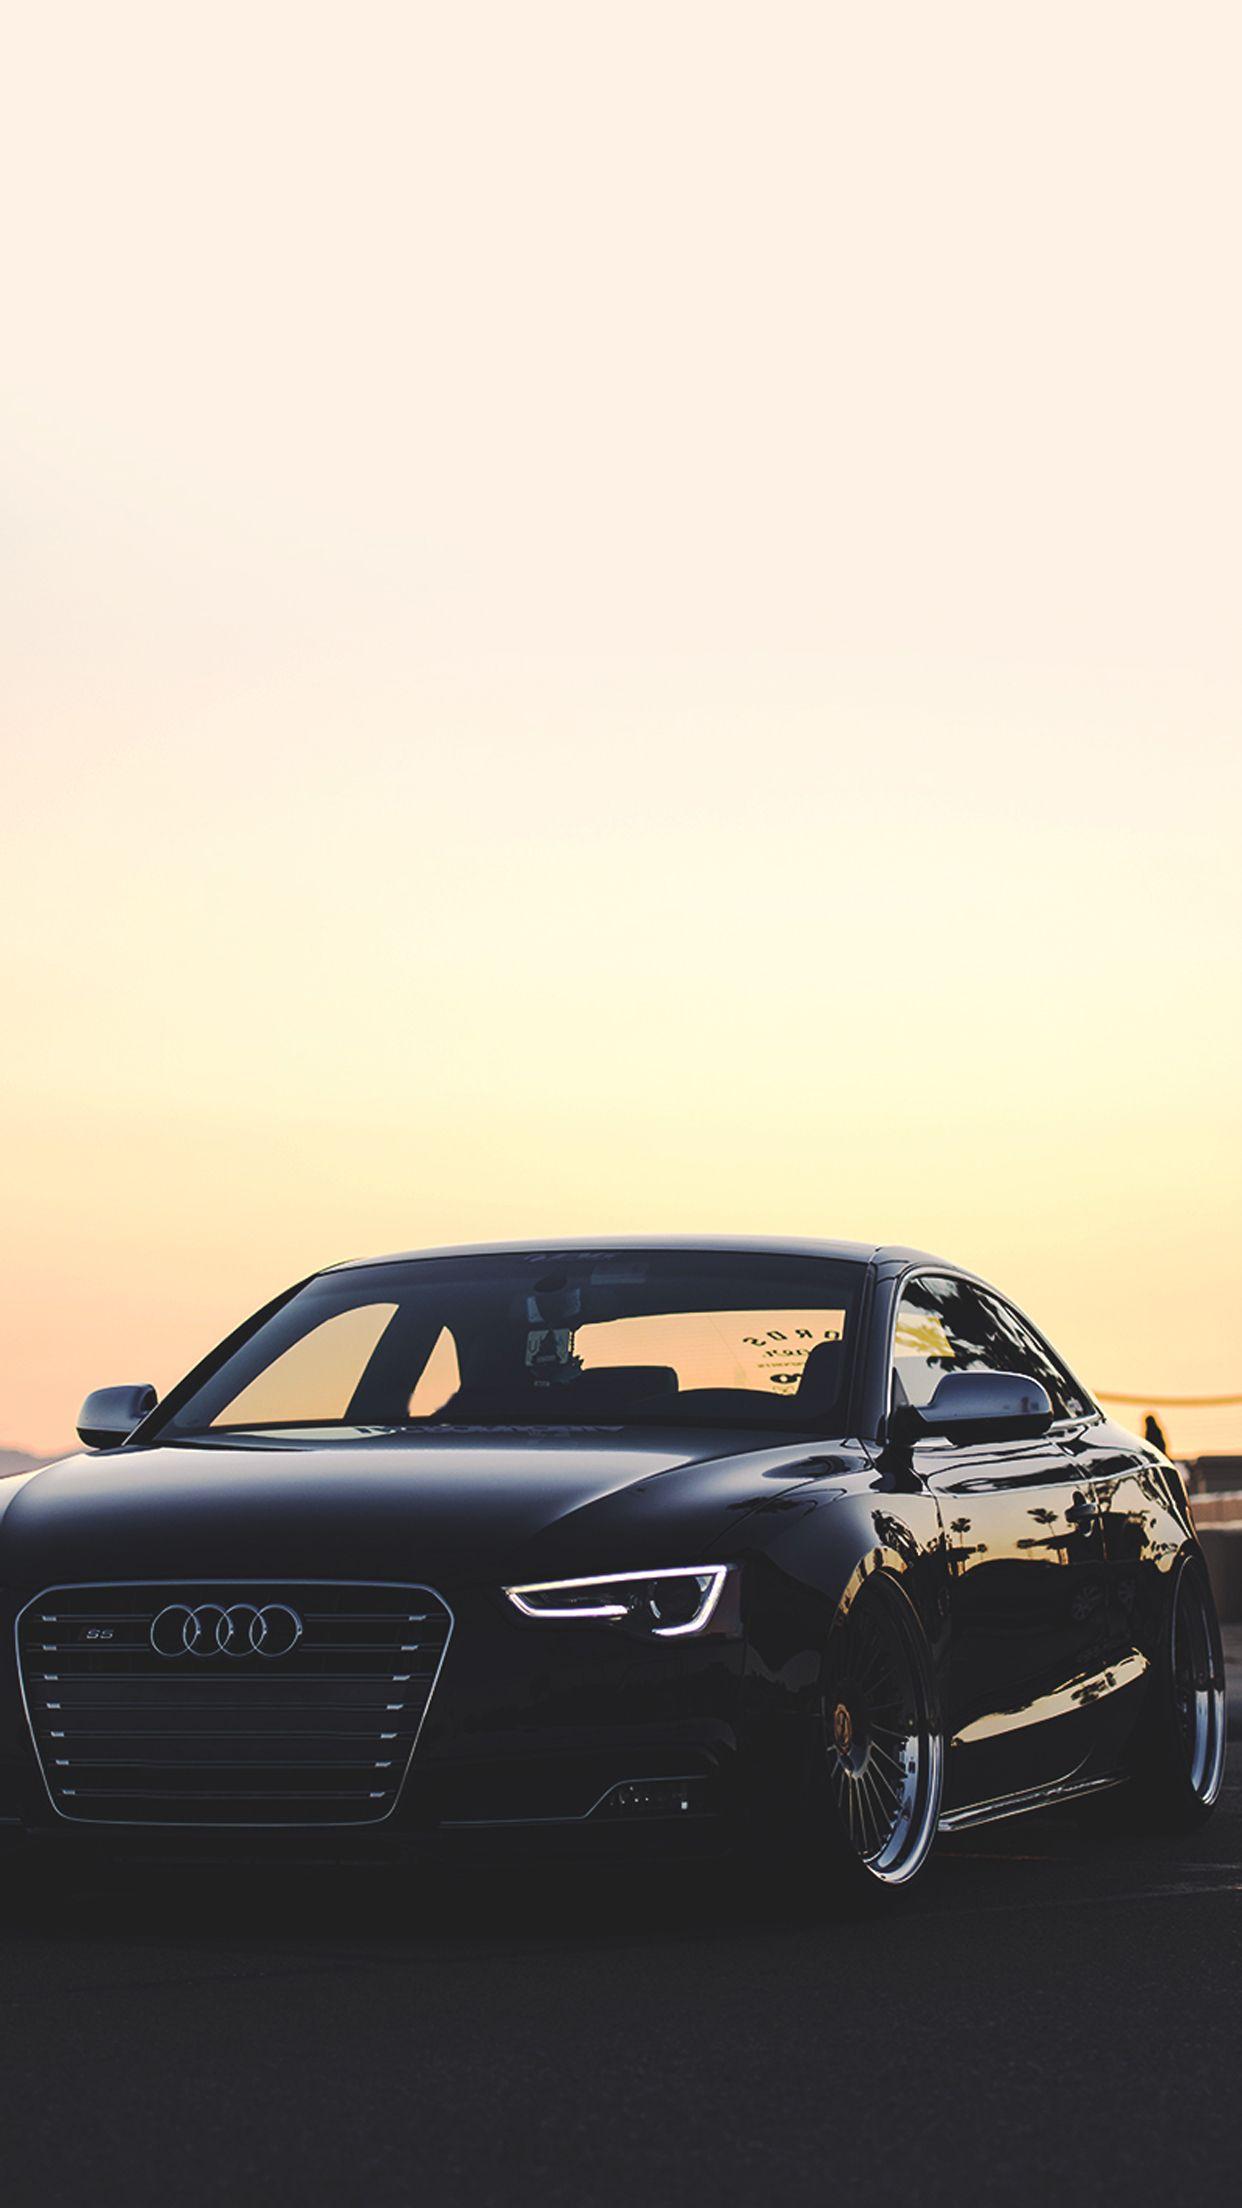 Audi Iphone Wallpapers Top Free Audi Iphone Backgrounds Wallpaperaccess